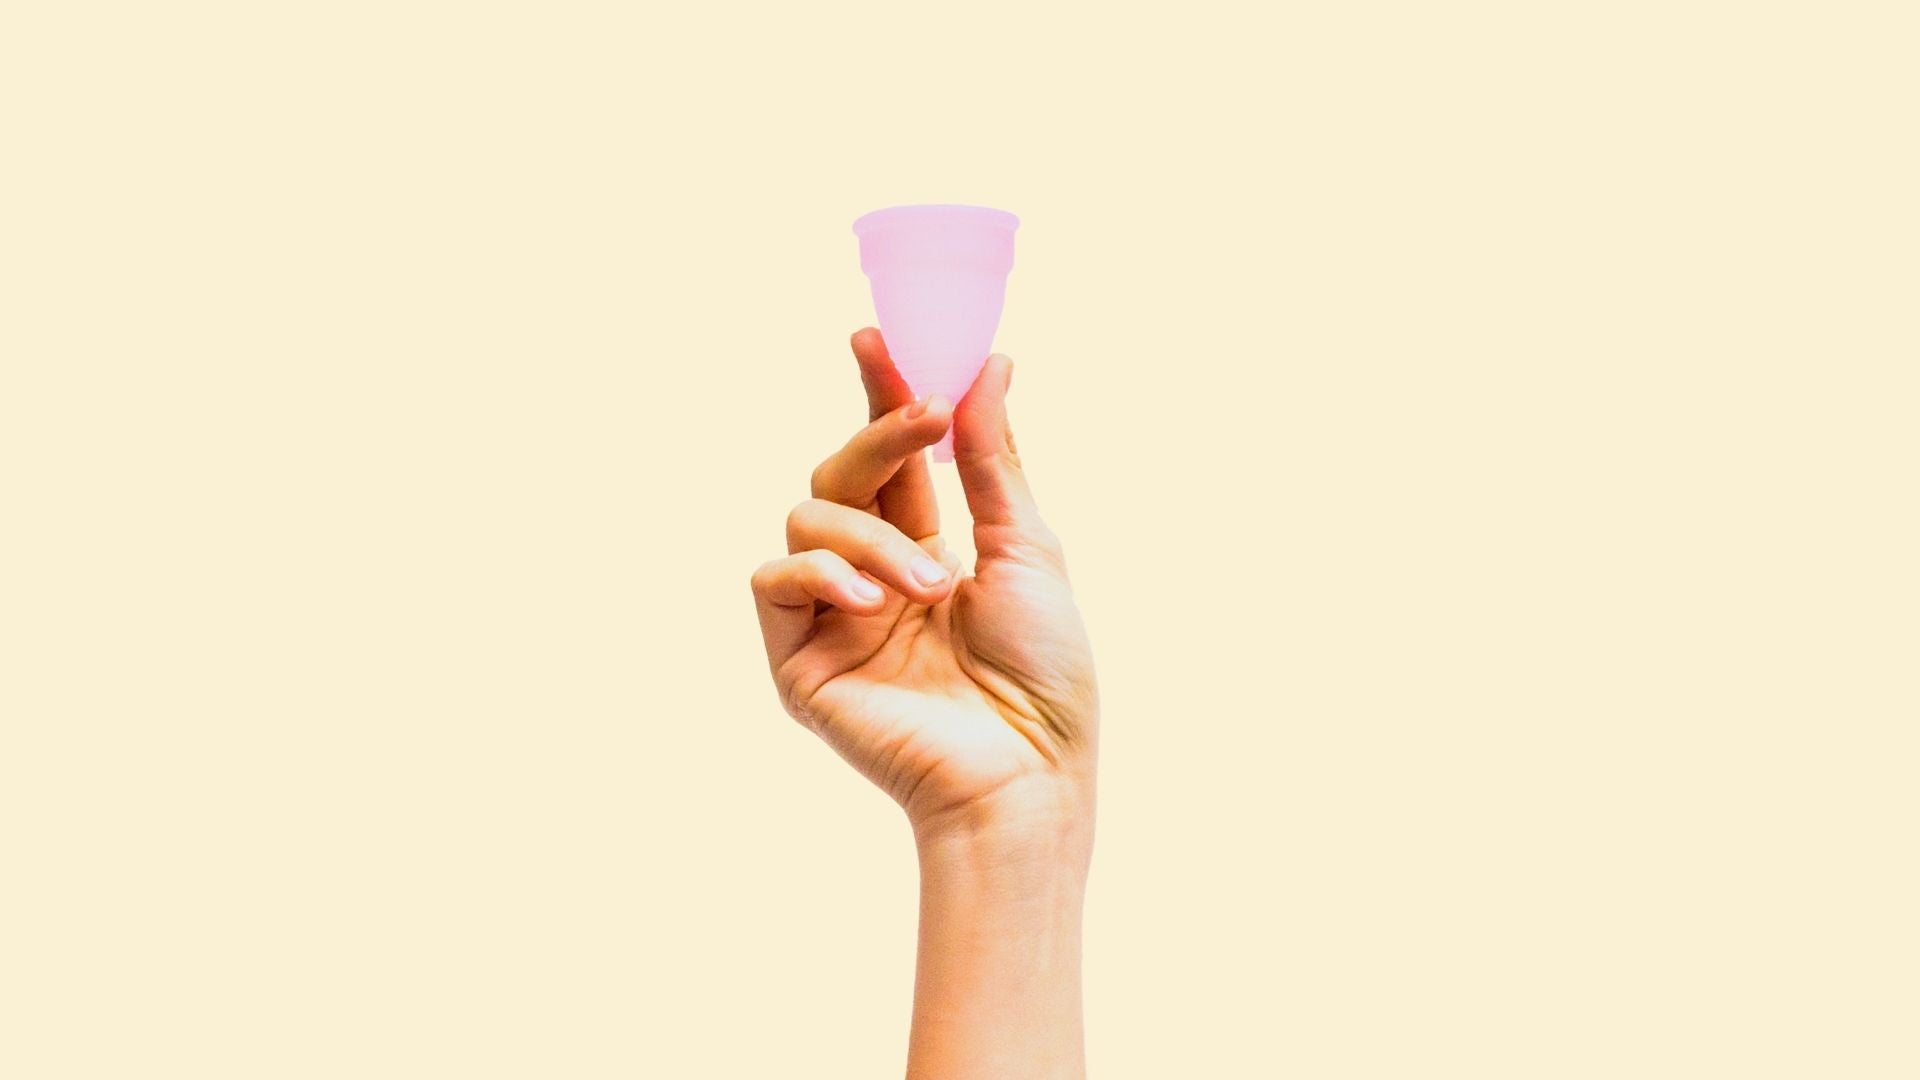 Woman's hand holding up pink soft menstrual cup over beige background